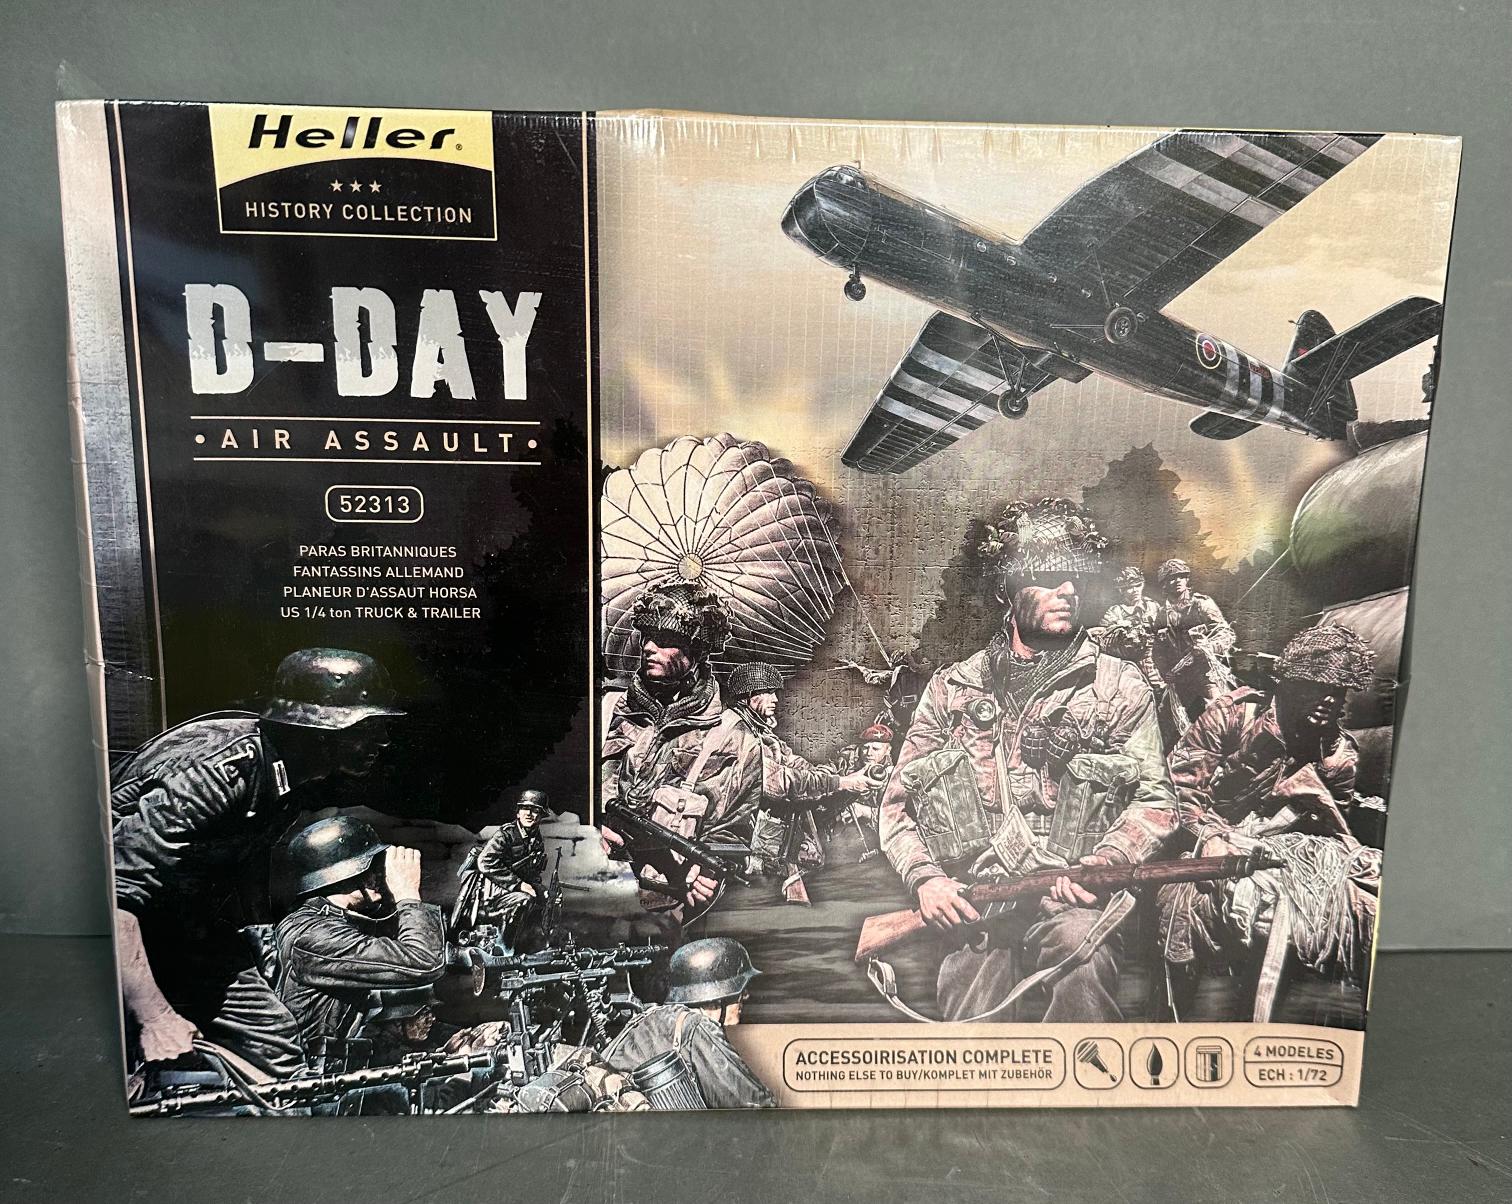 A Heller history collection D-Day Air Assault model kit - Image 3 of 5